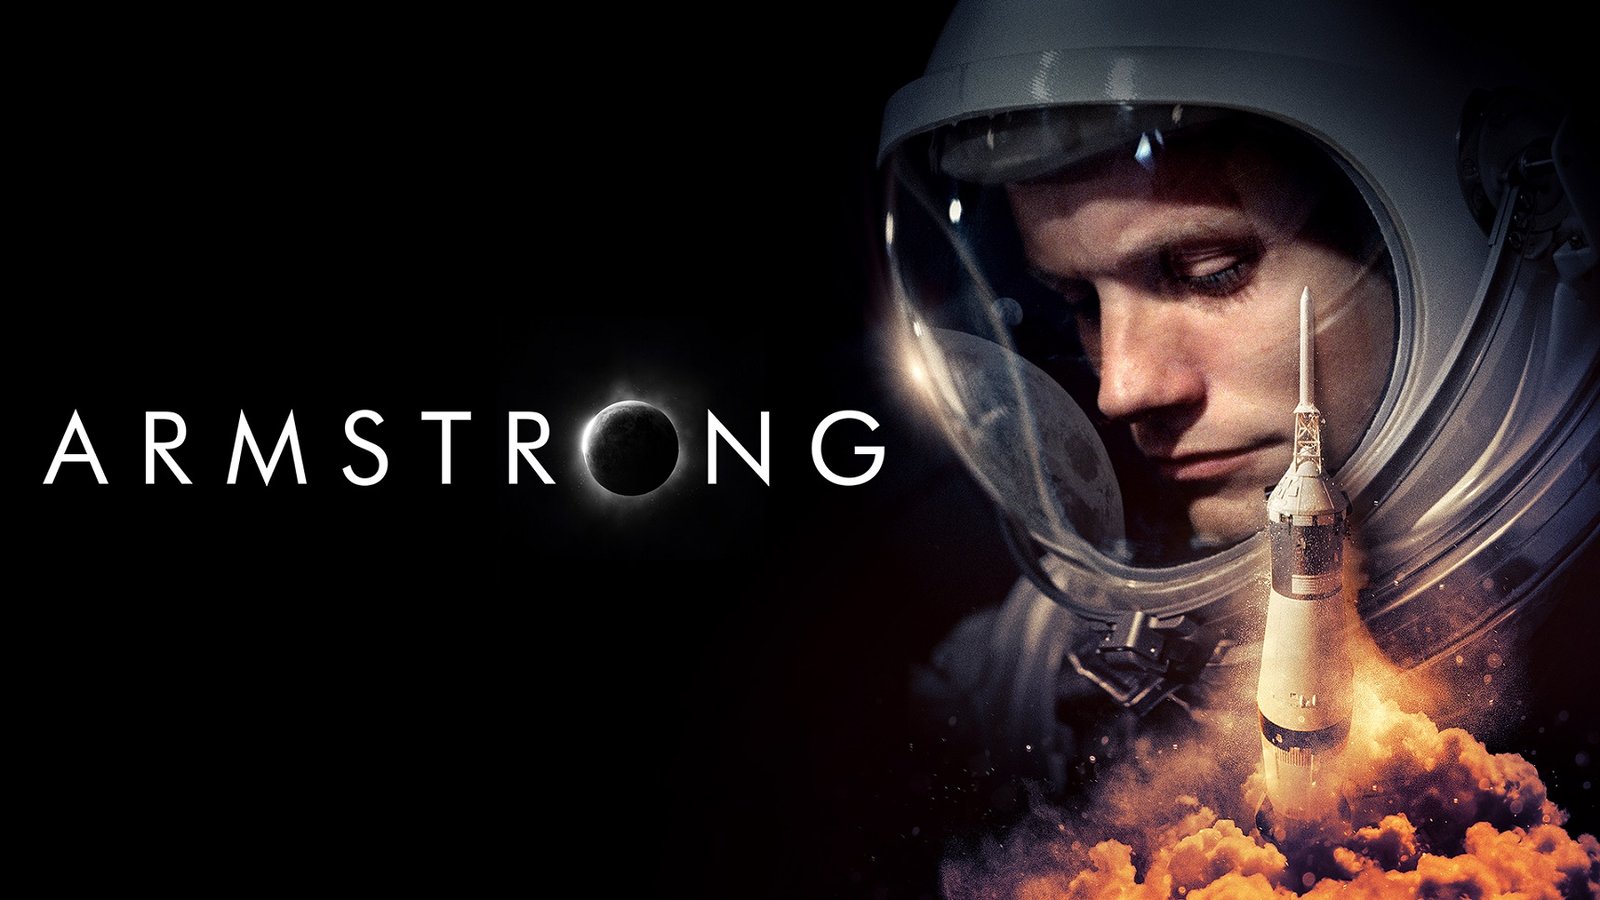 Armstrong - The Life of Astronaut Neil Armstrong